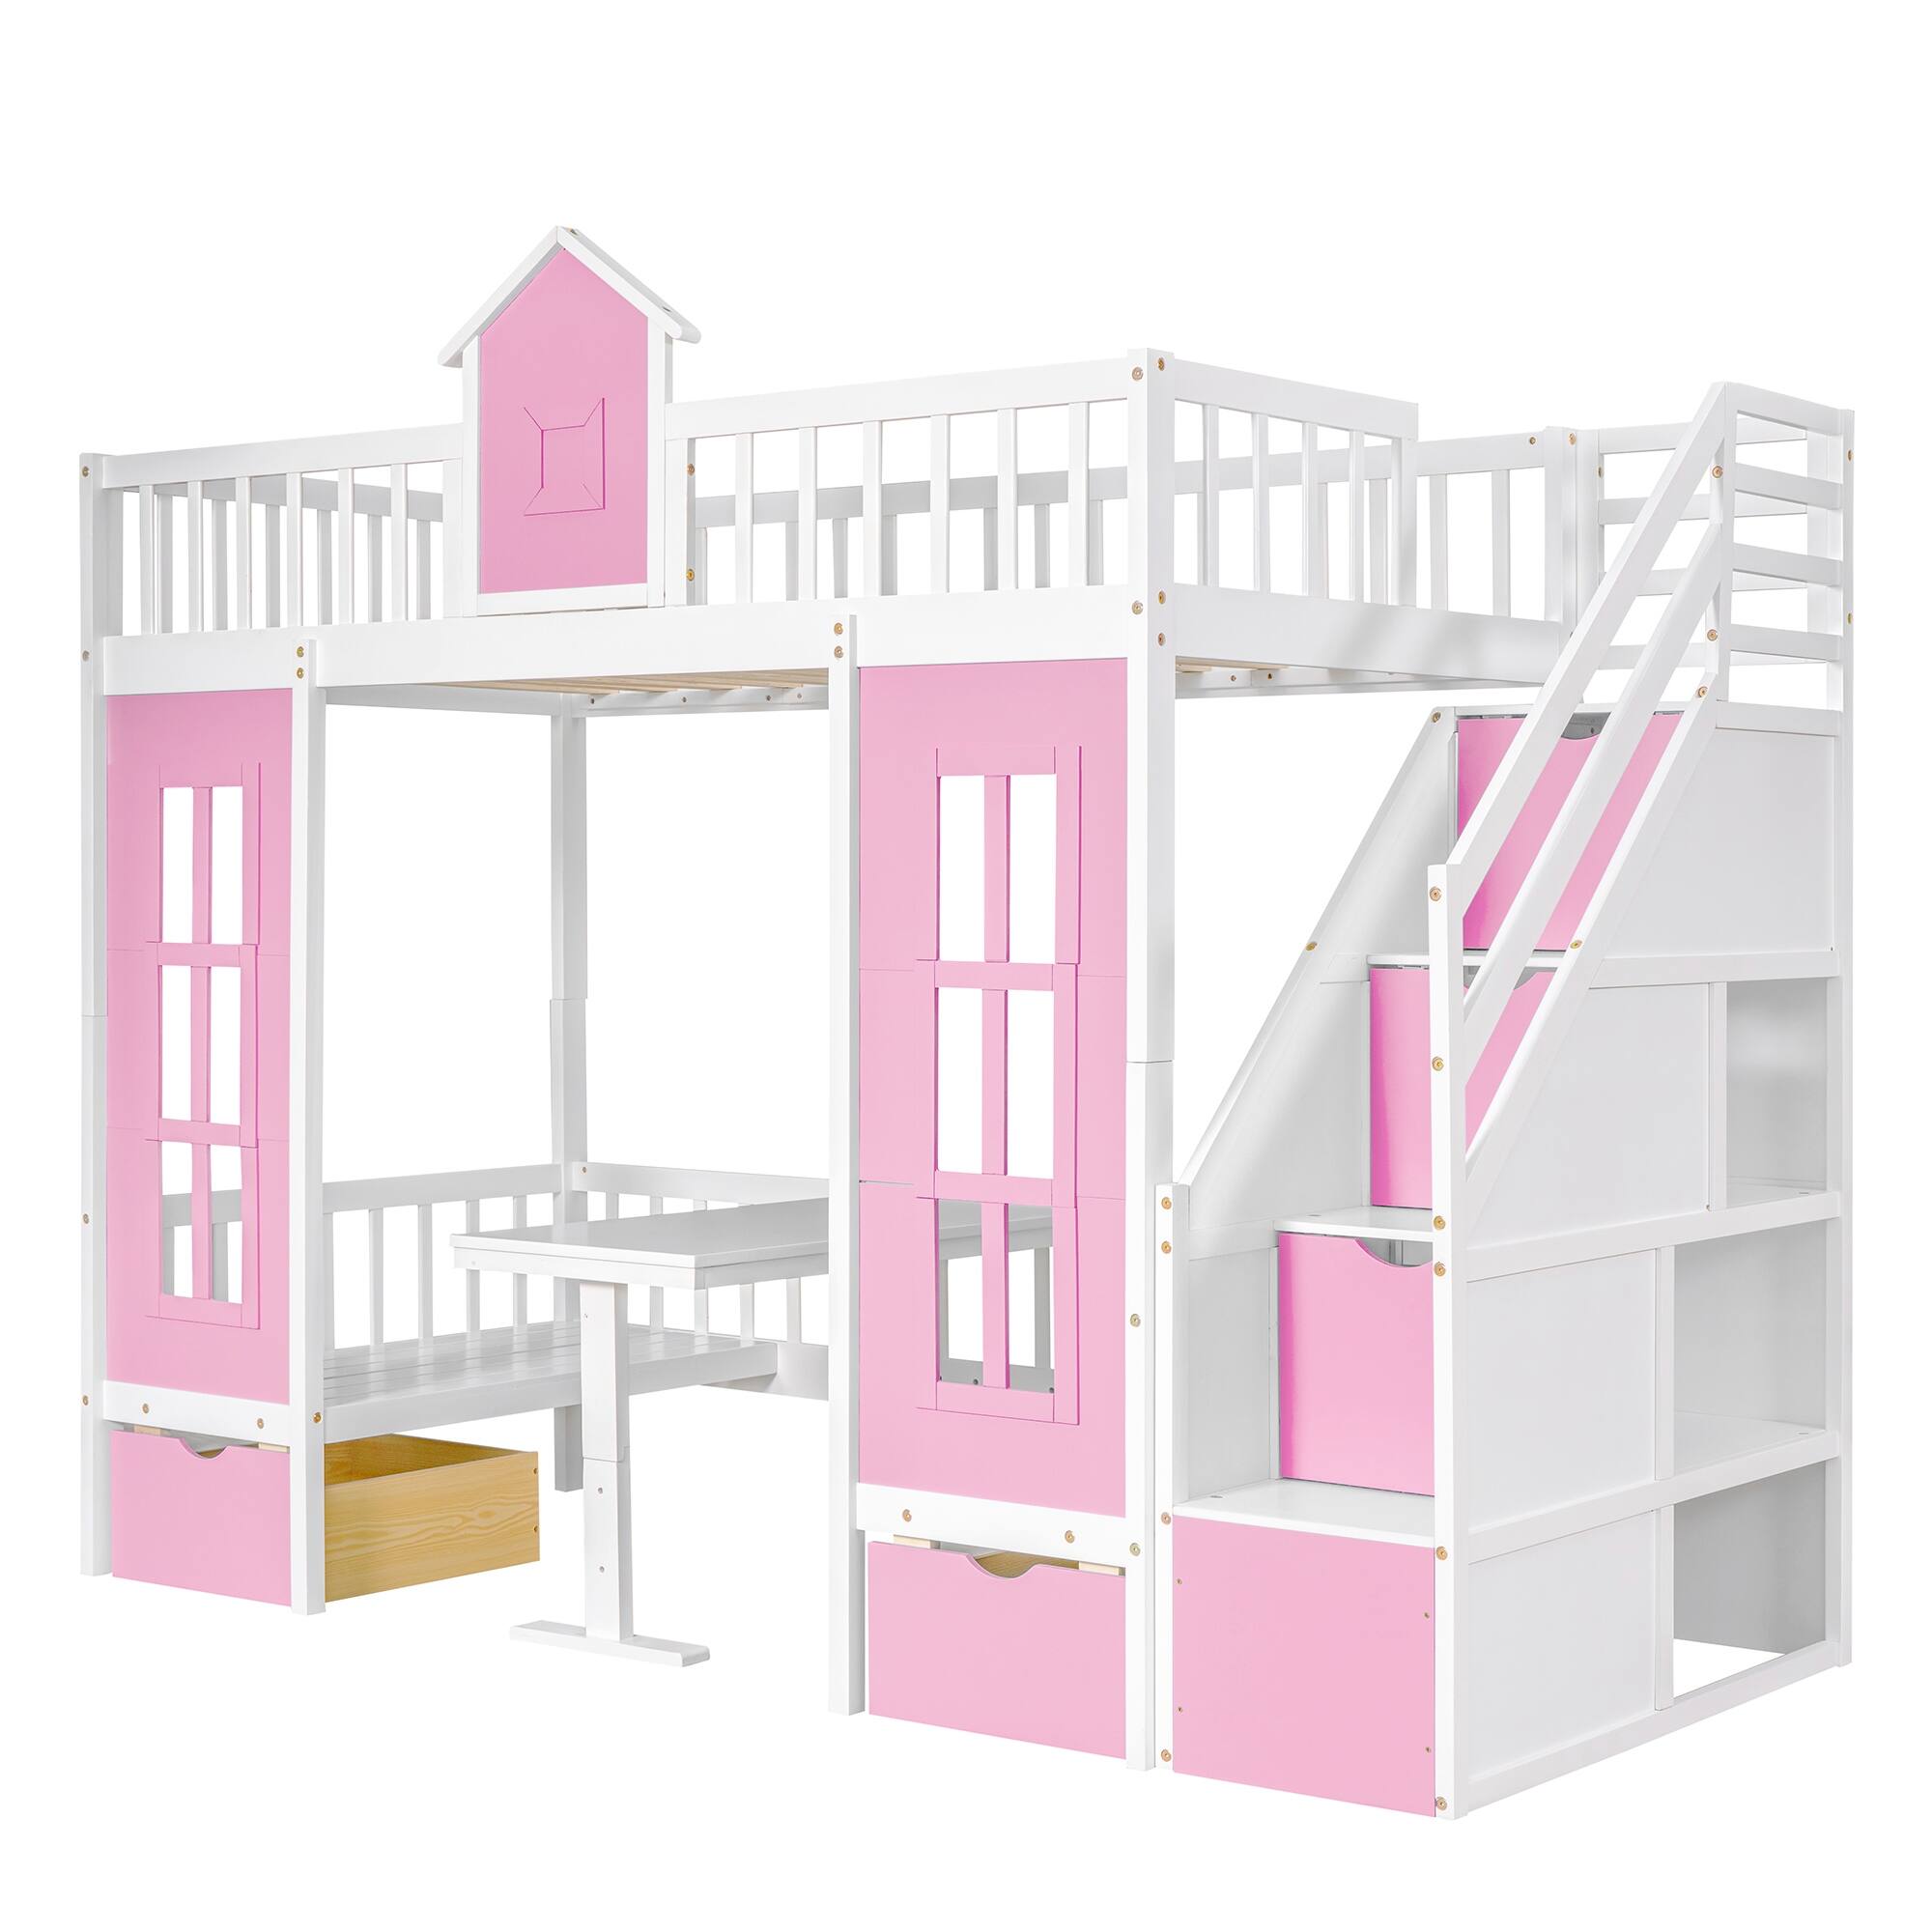 Playhouse Twin Bunk Bed with Changeable Table, Convertible Upper Bed, Down Desk